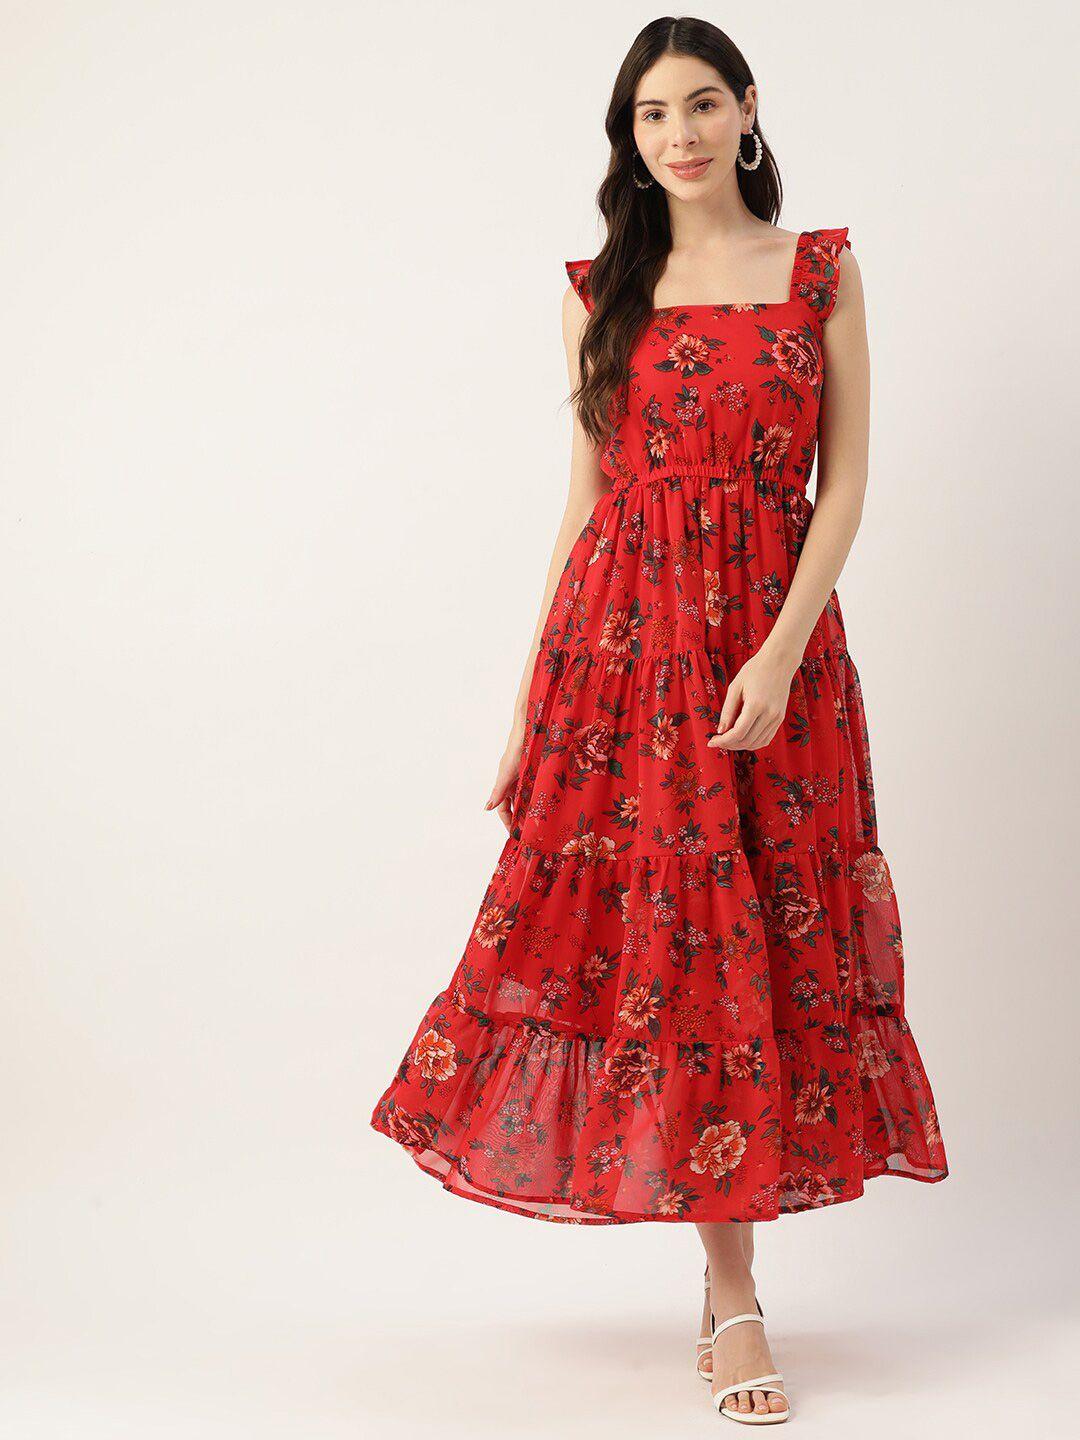 dressberry red floral printed tiered detailed square neck fit & flare dress